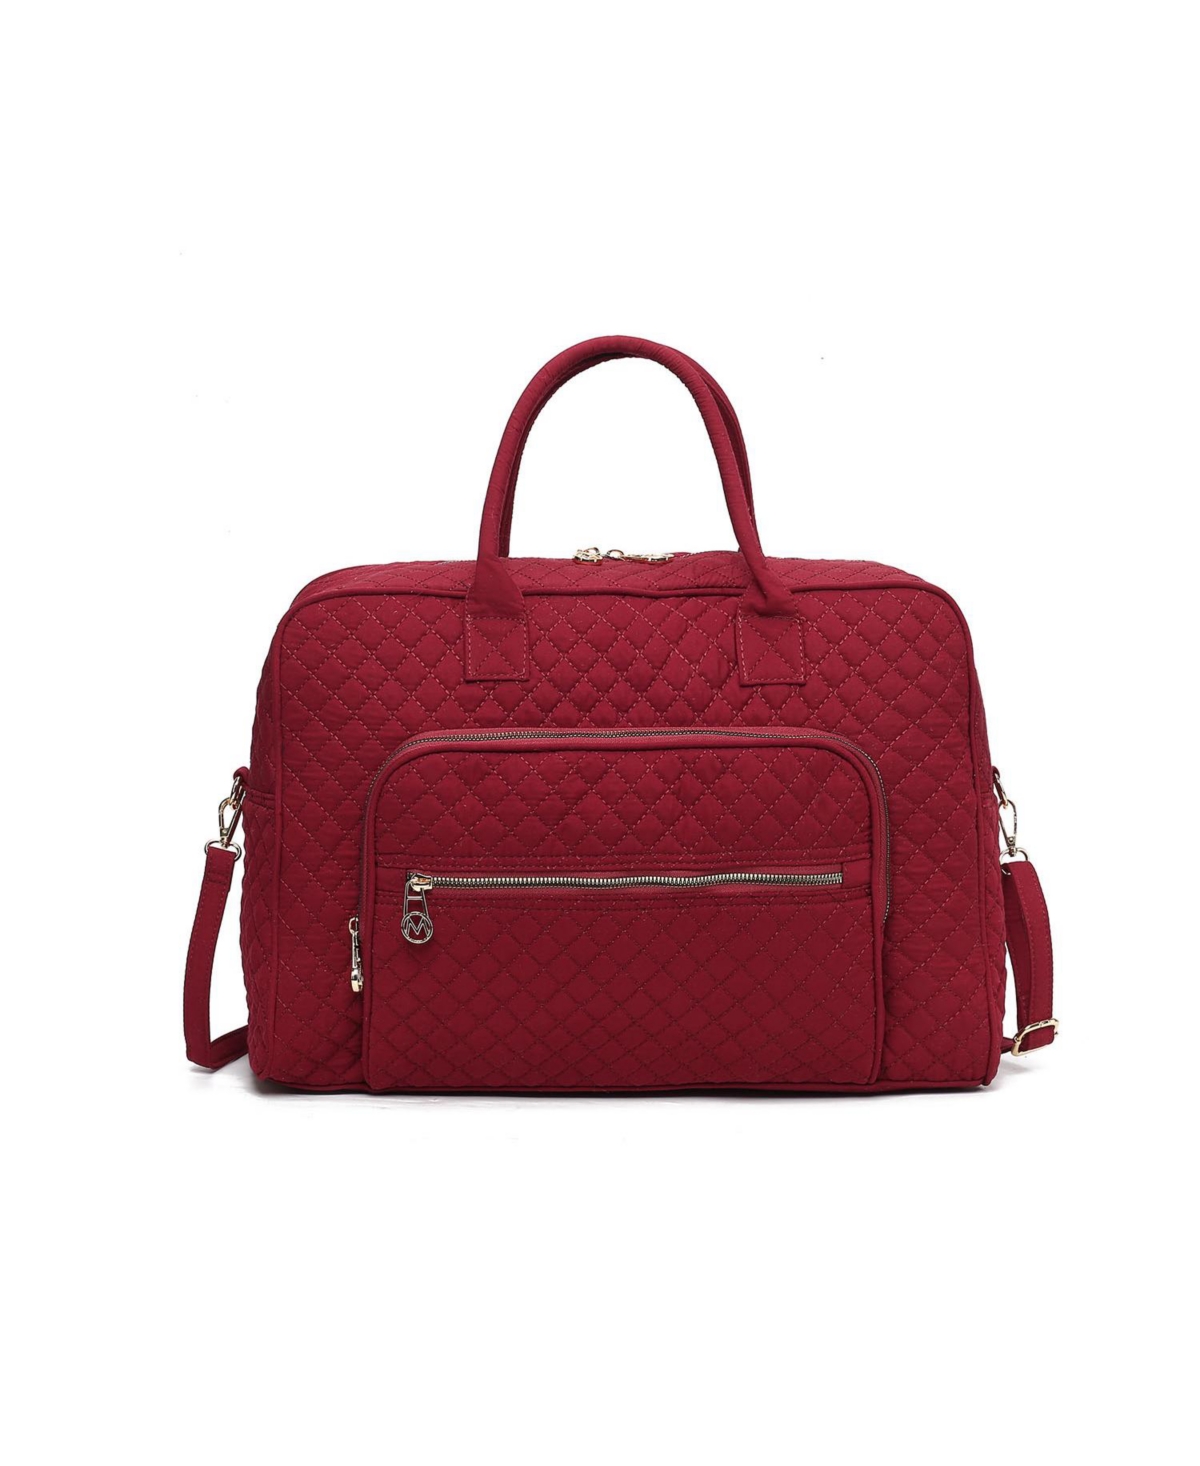 Jayla Solid Quilted Cotton Women s Duffle Bag by Mia K - Wine